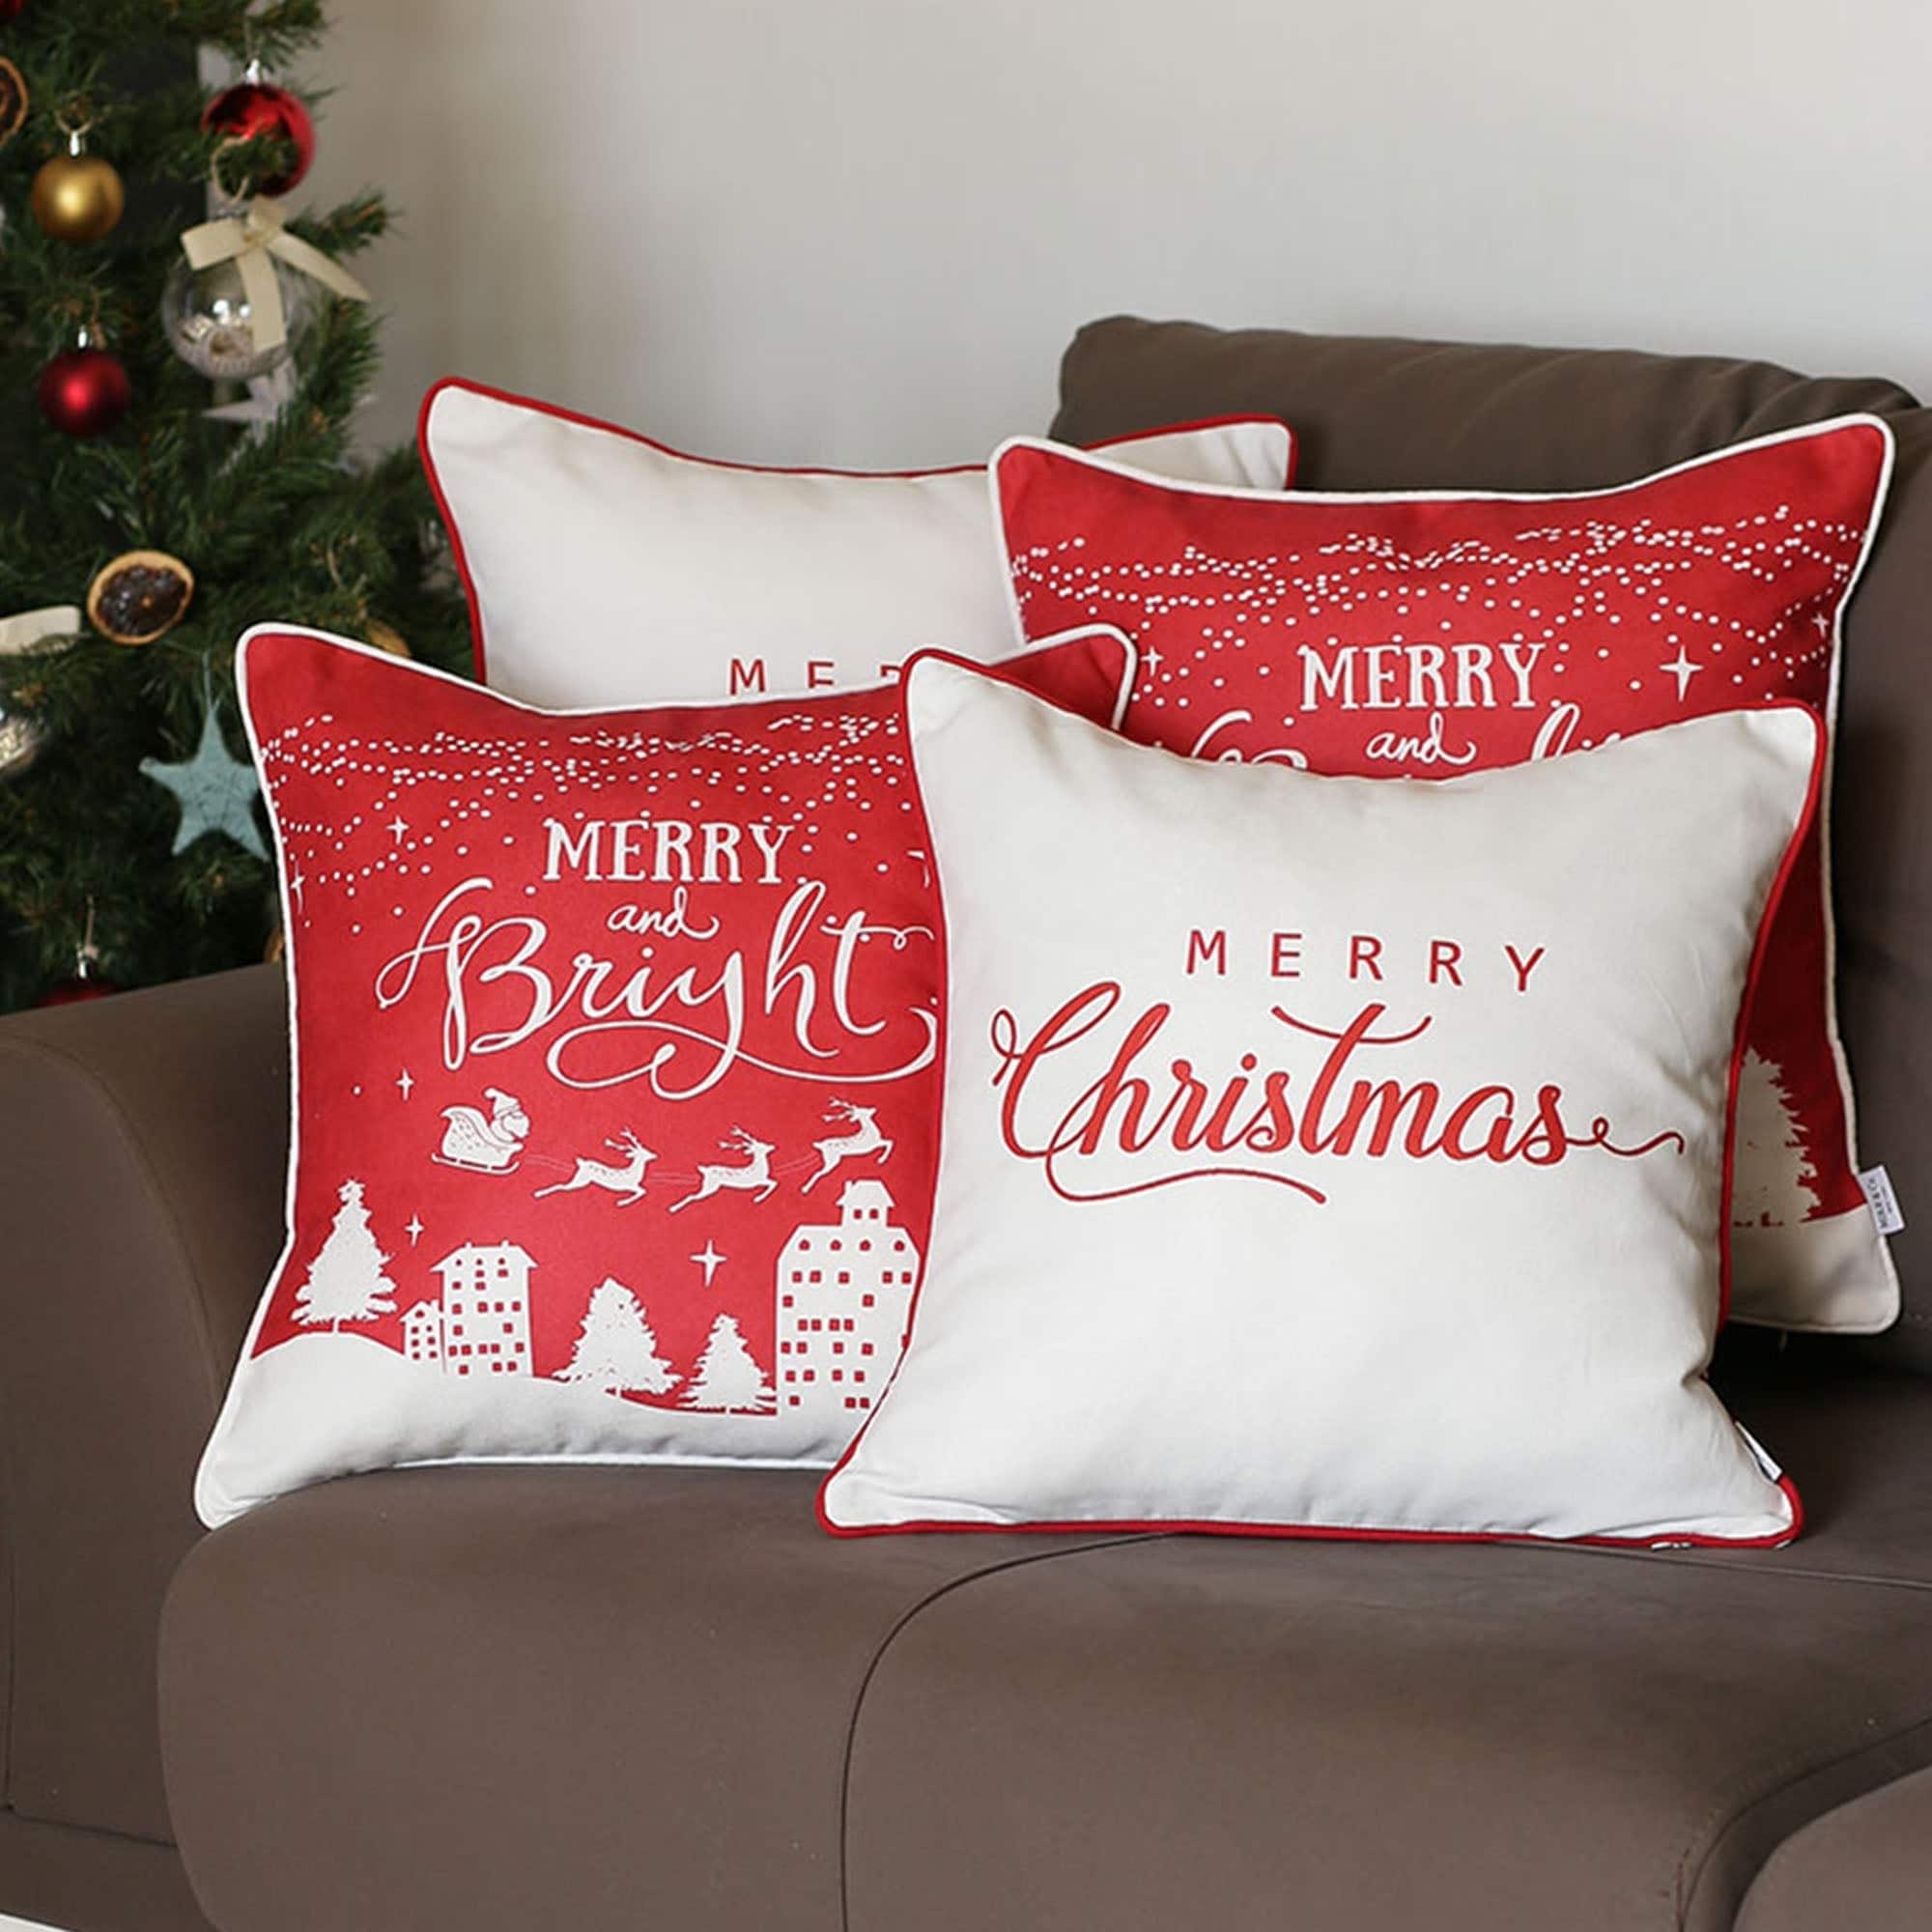 Christmas decorative pillows. Set Of 4. New With Tags. Bed Bath & Beyond.